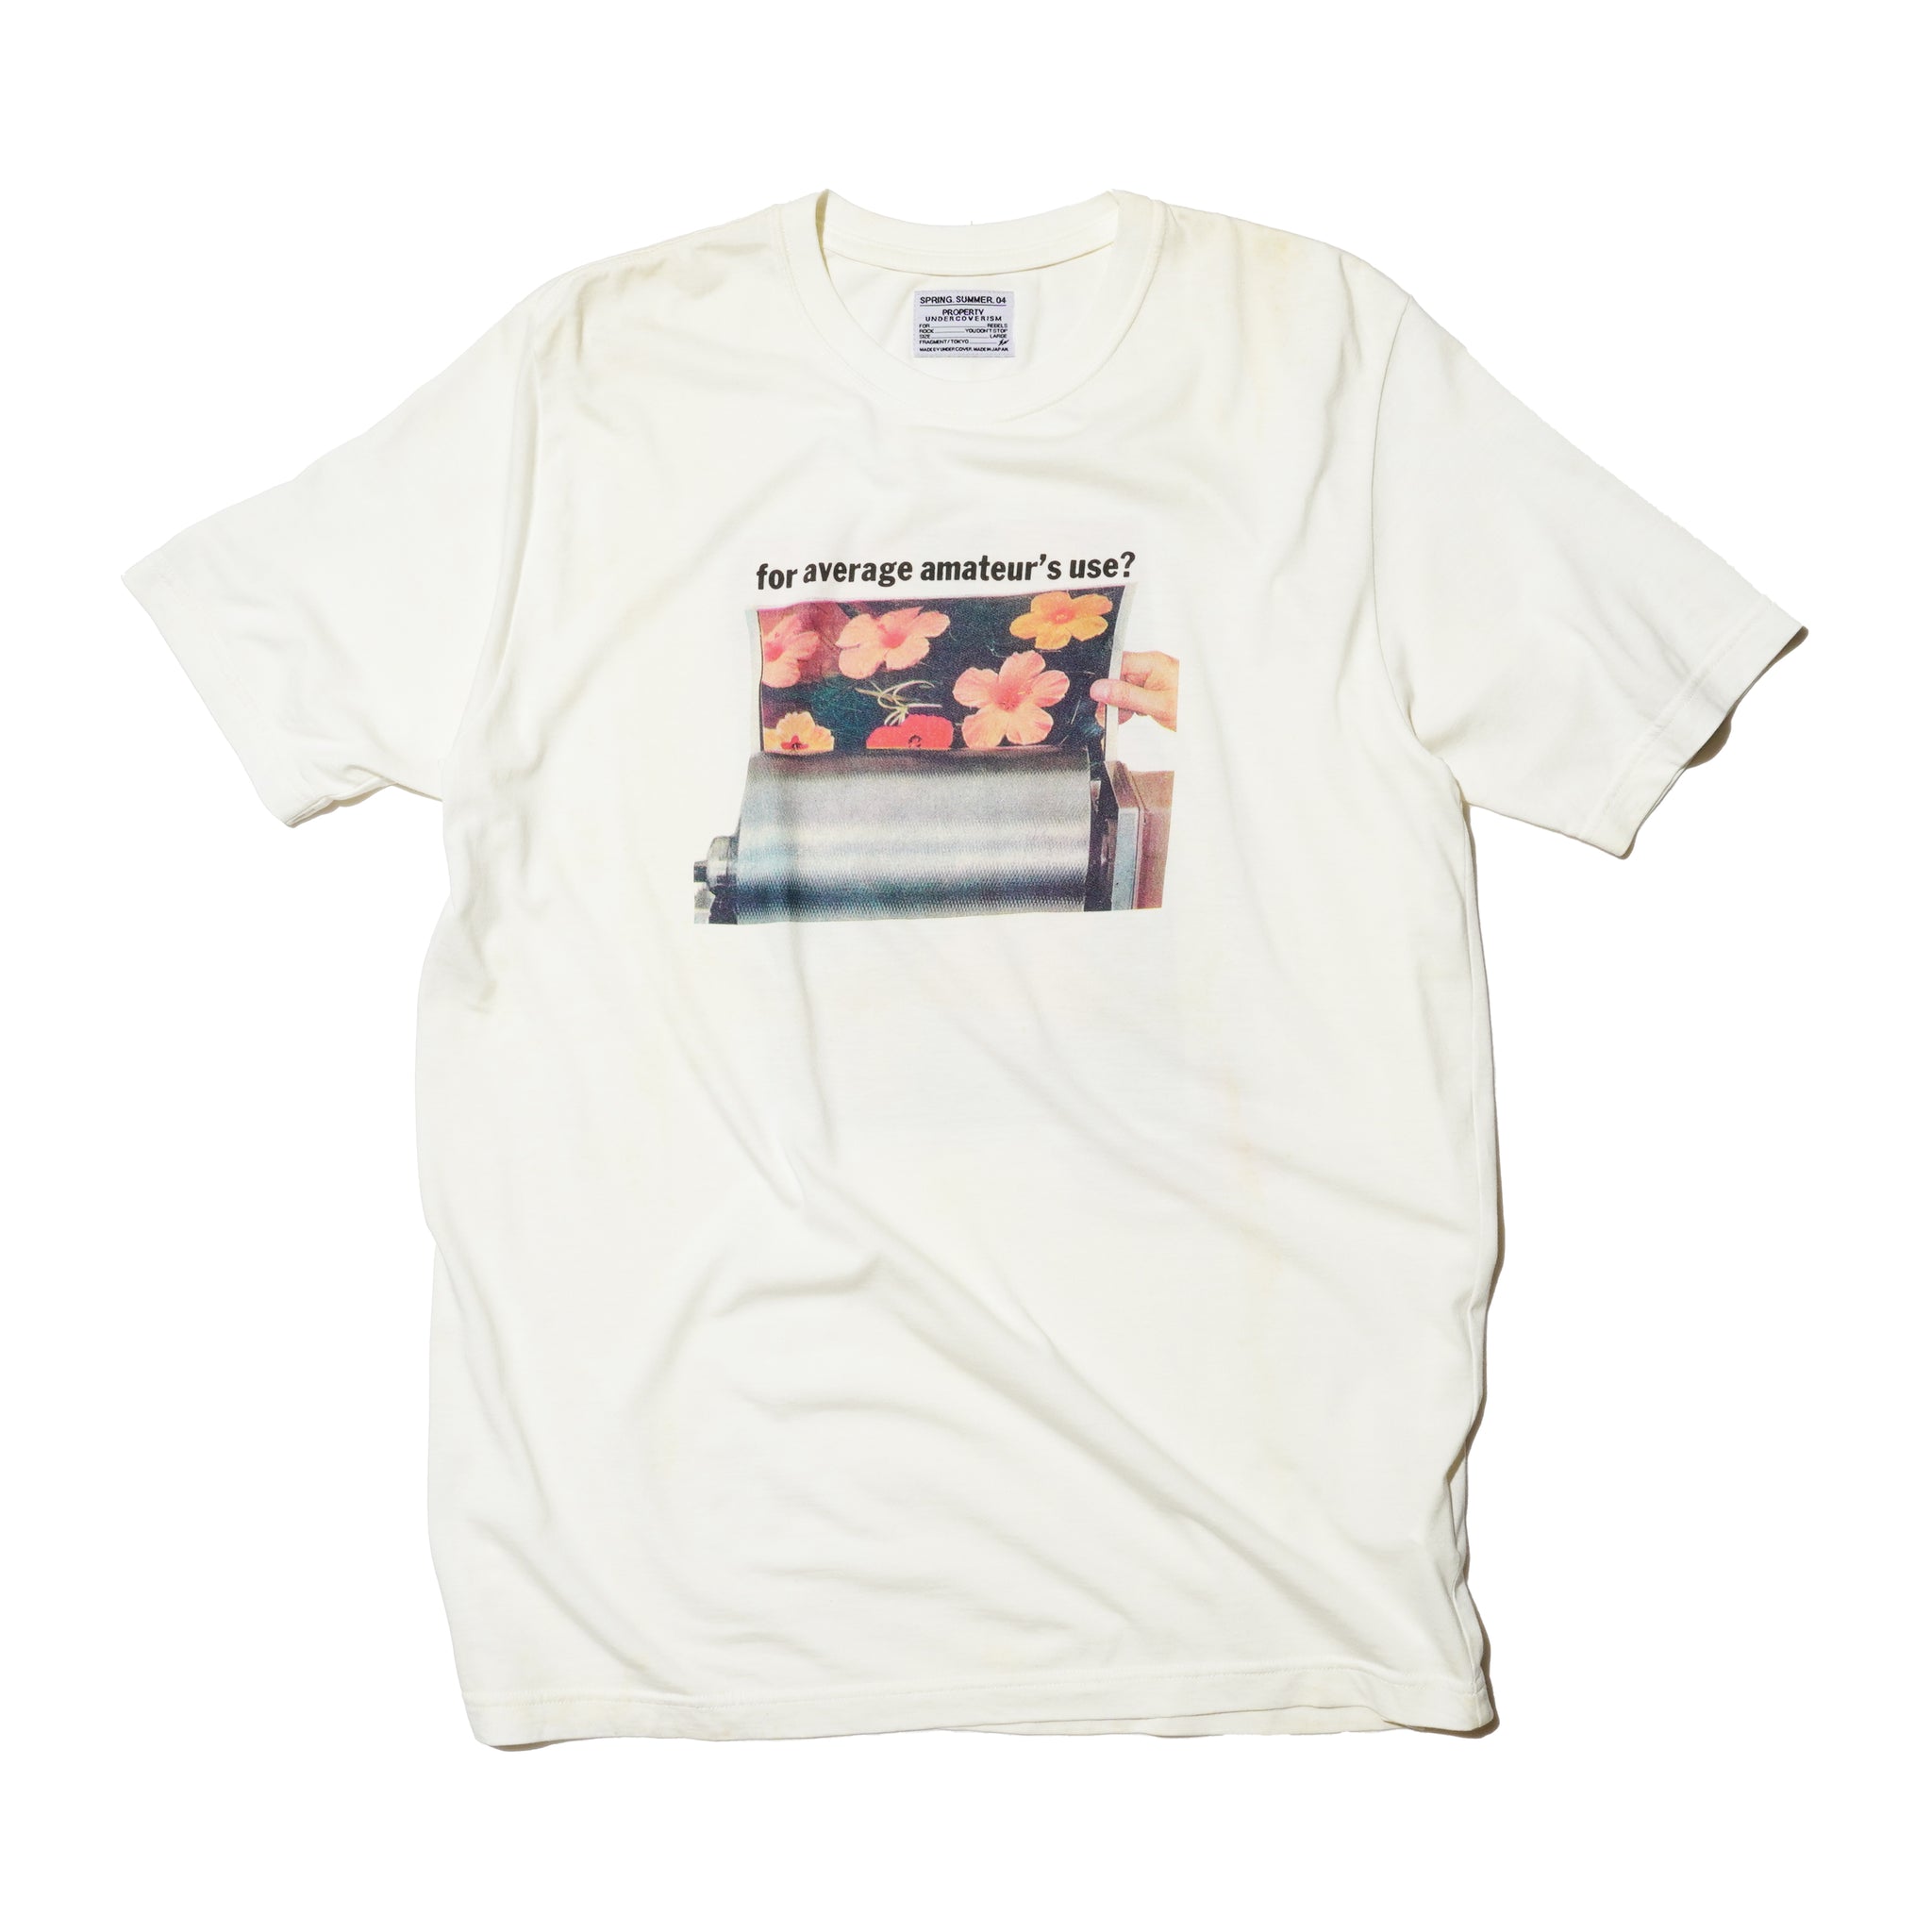 UNDERCOVERISM FRAGMENT TEE